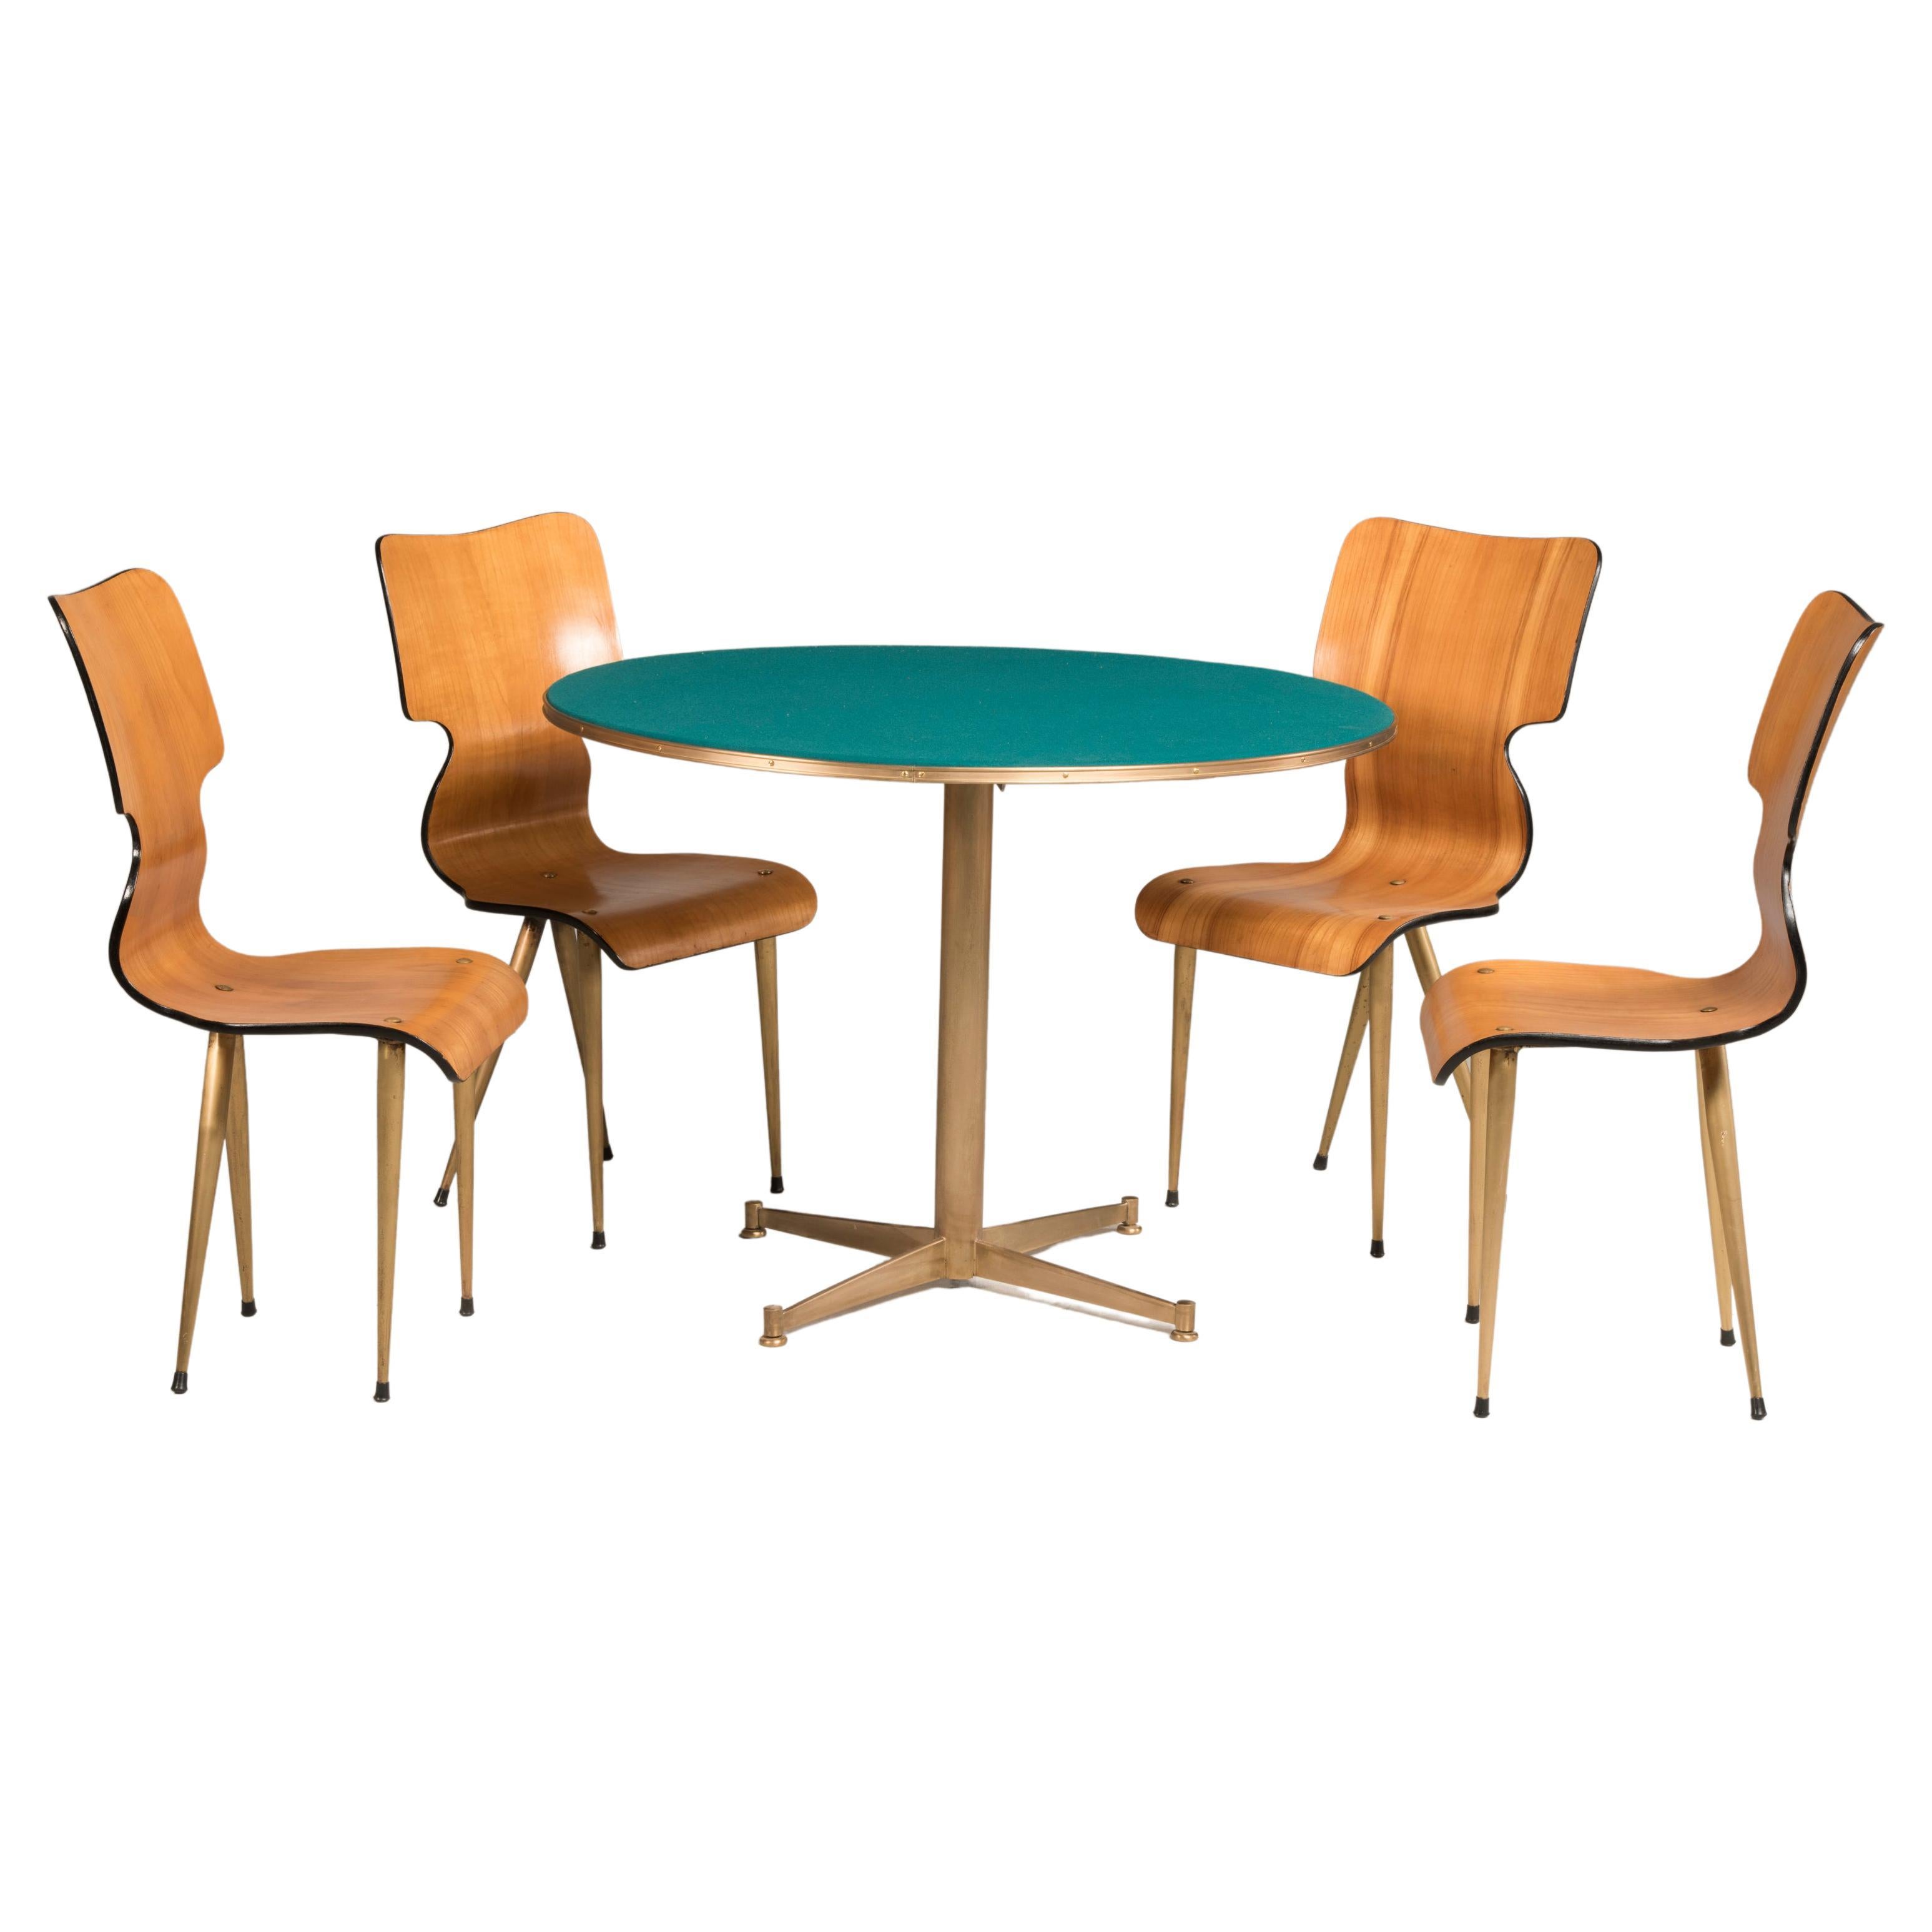 Mid Century Rounded Green fabric wood and brass legs game table and four chairs.
This set comes from Italy from 1950s period.
The brass base of table forms a cross. Chairs are made in pressed and shaped wood, black lined and have brass legs.
The